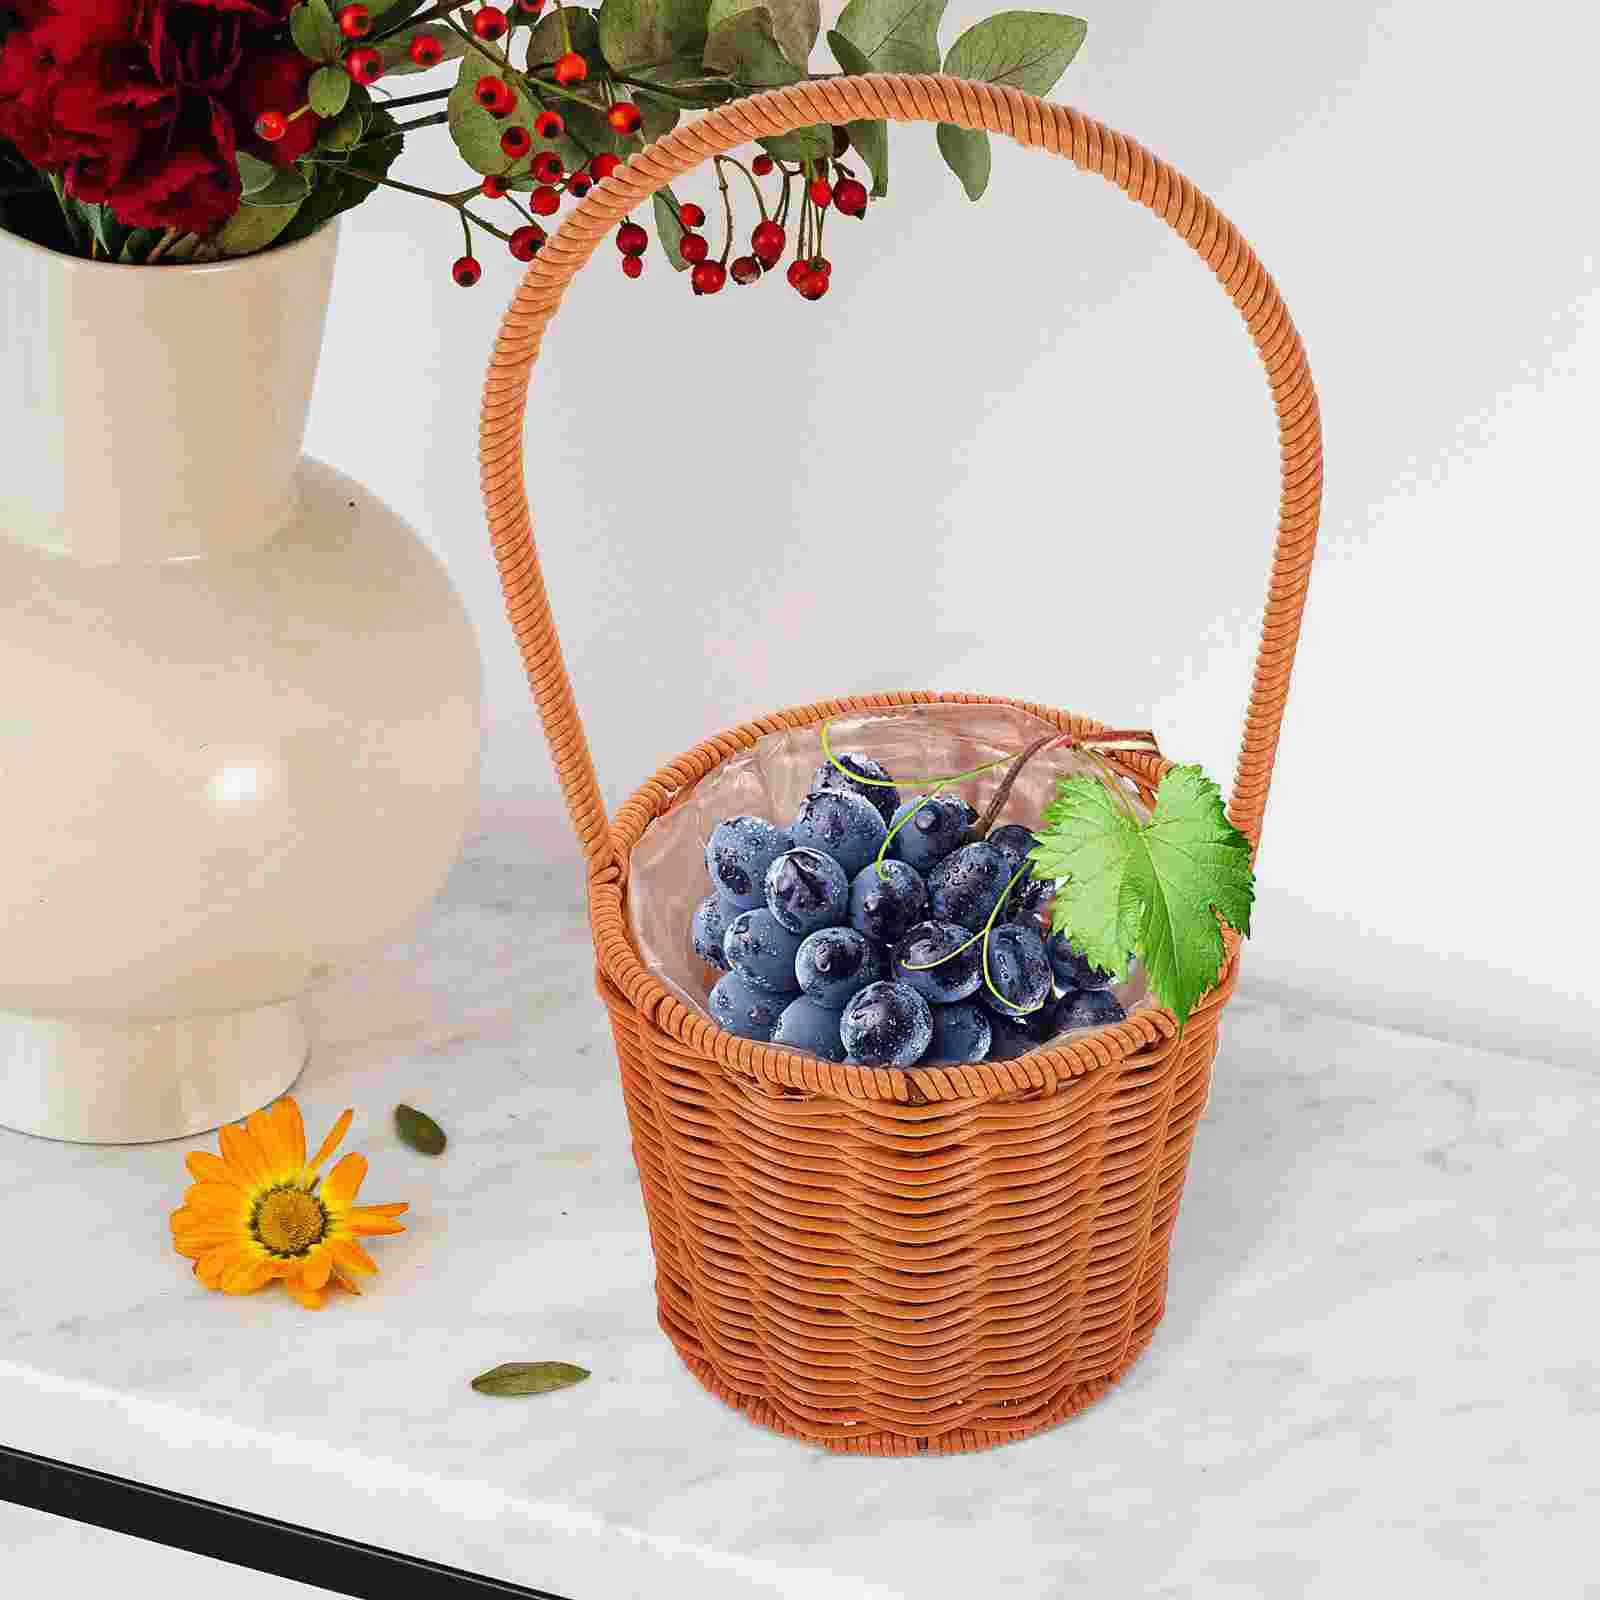 

Picnic Basket With Handle Daily Supplies Multi-function Storage Portable Fruit Baskets Handheld Grocery Woven Shopping